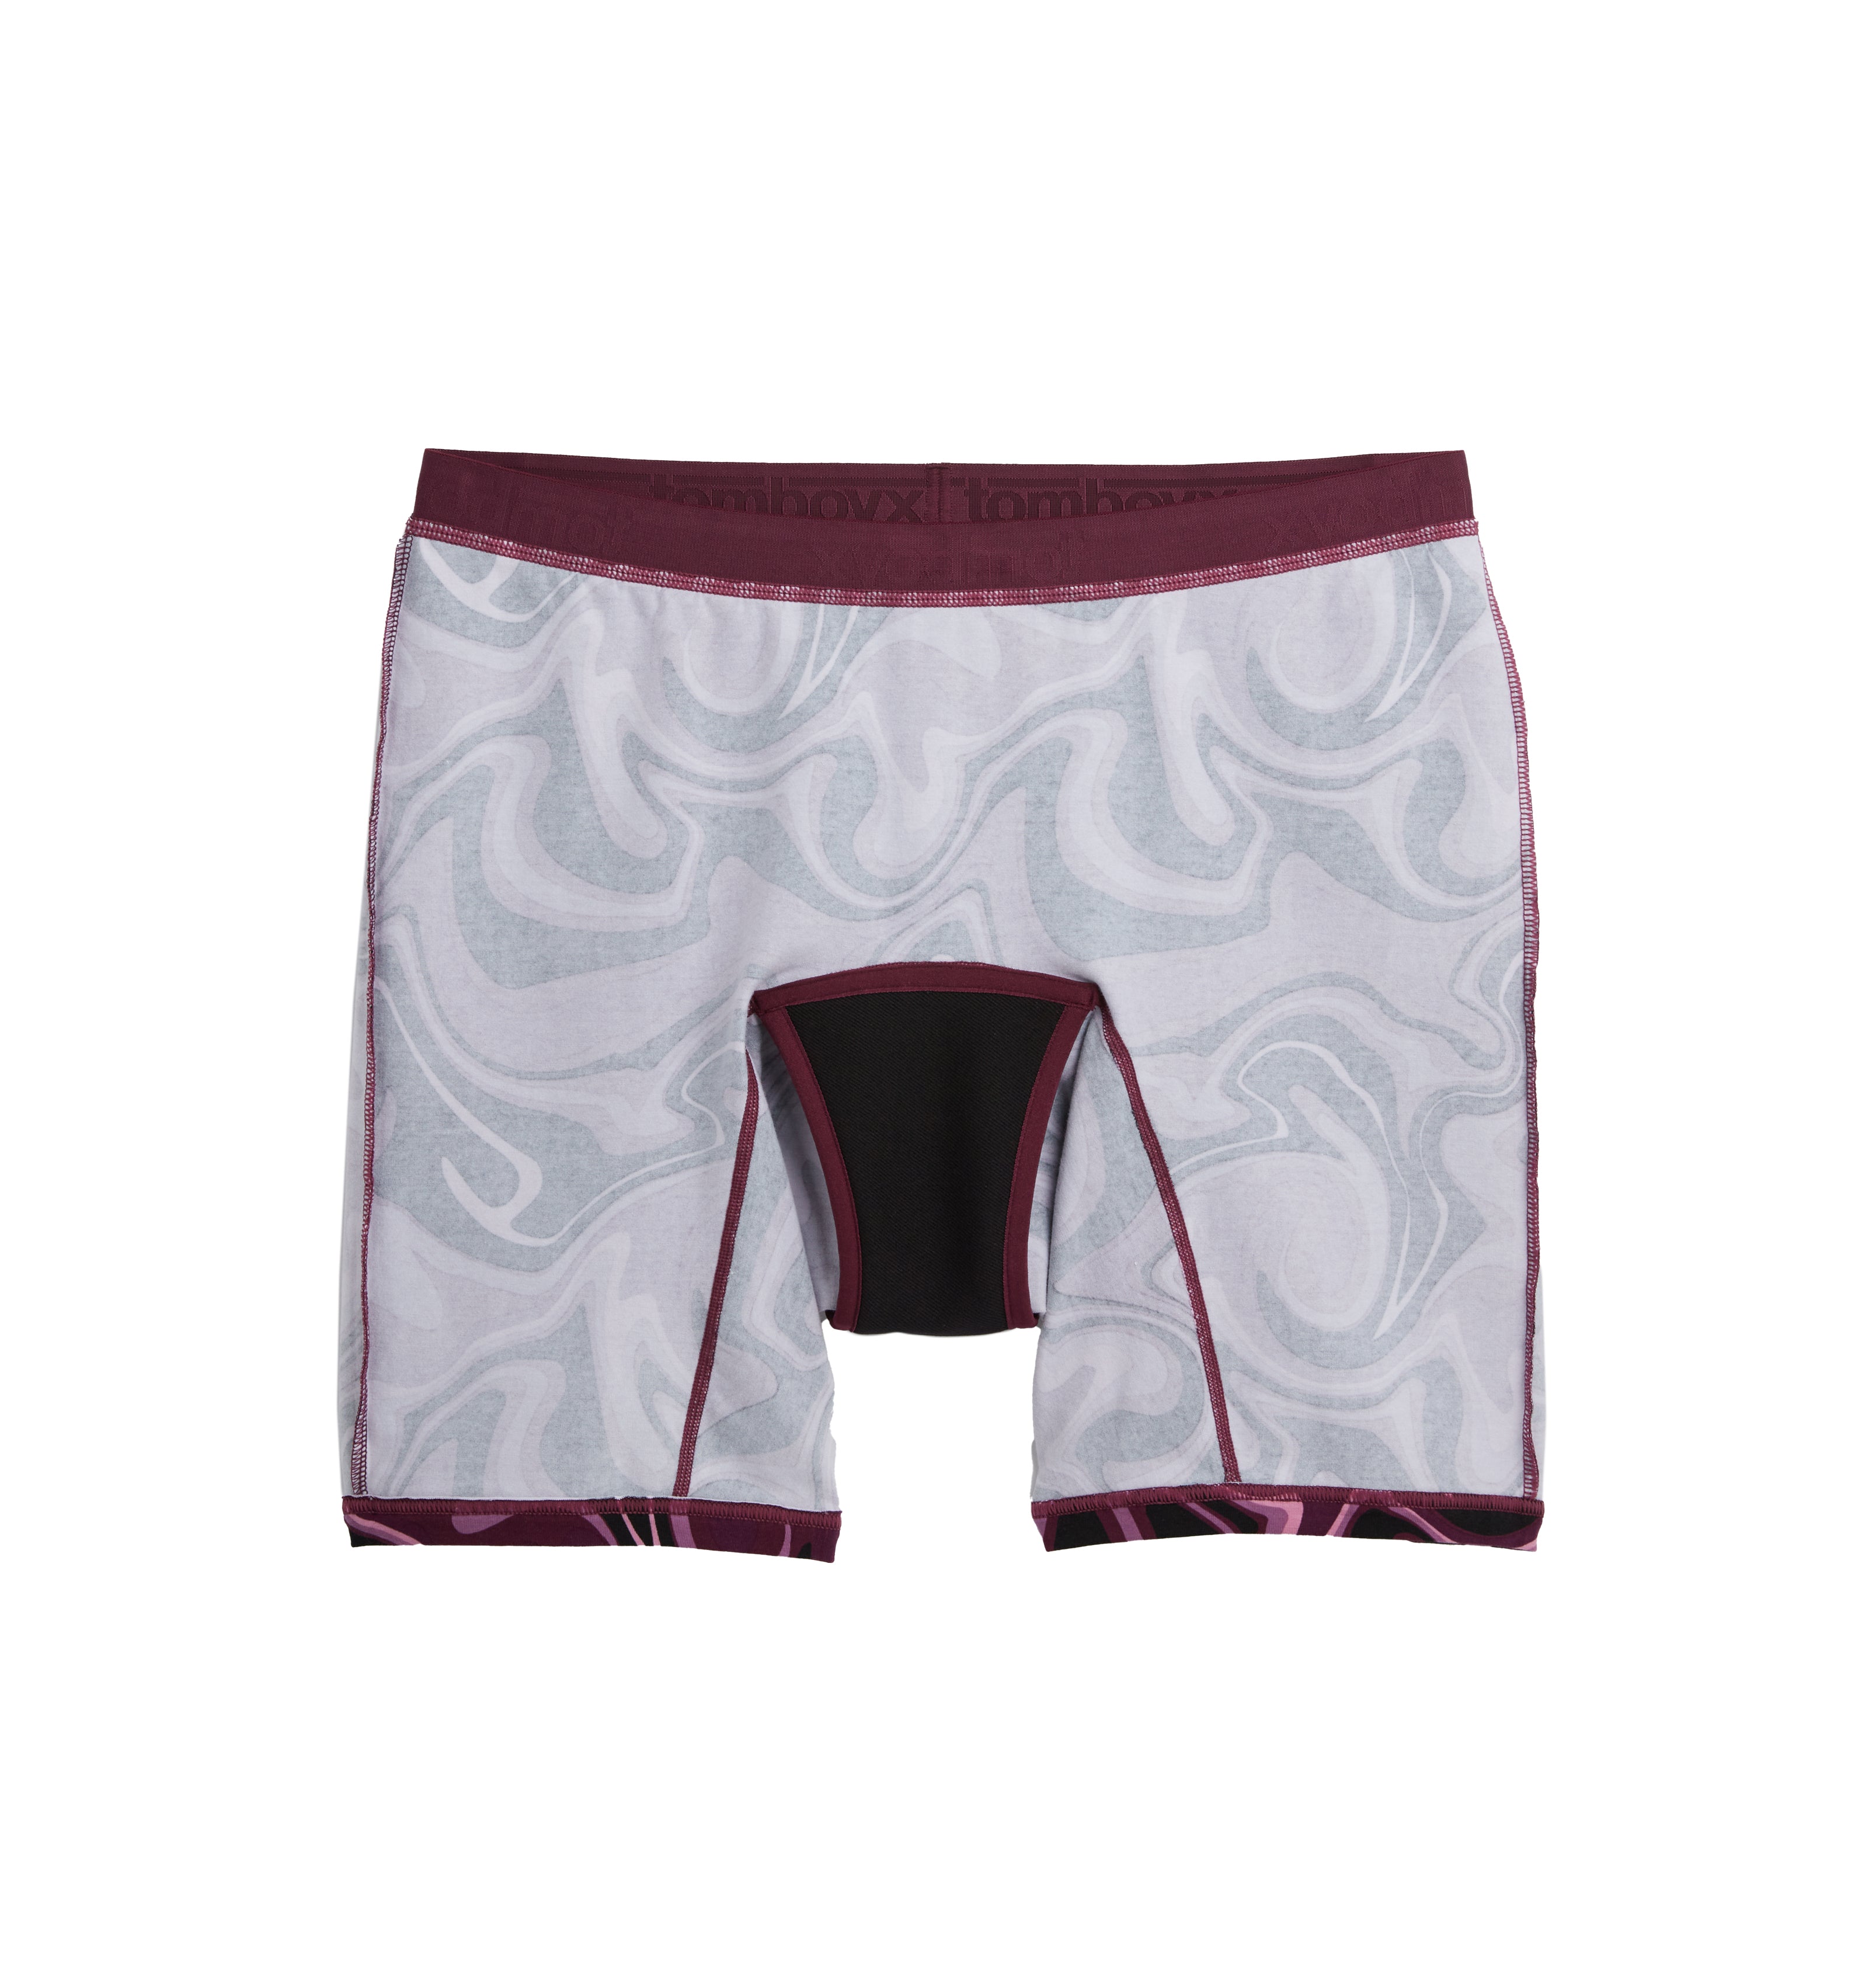 First Line Period 9" Boxer Briefs - Go With The Flow